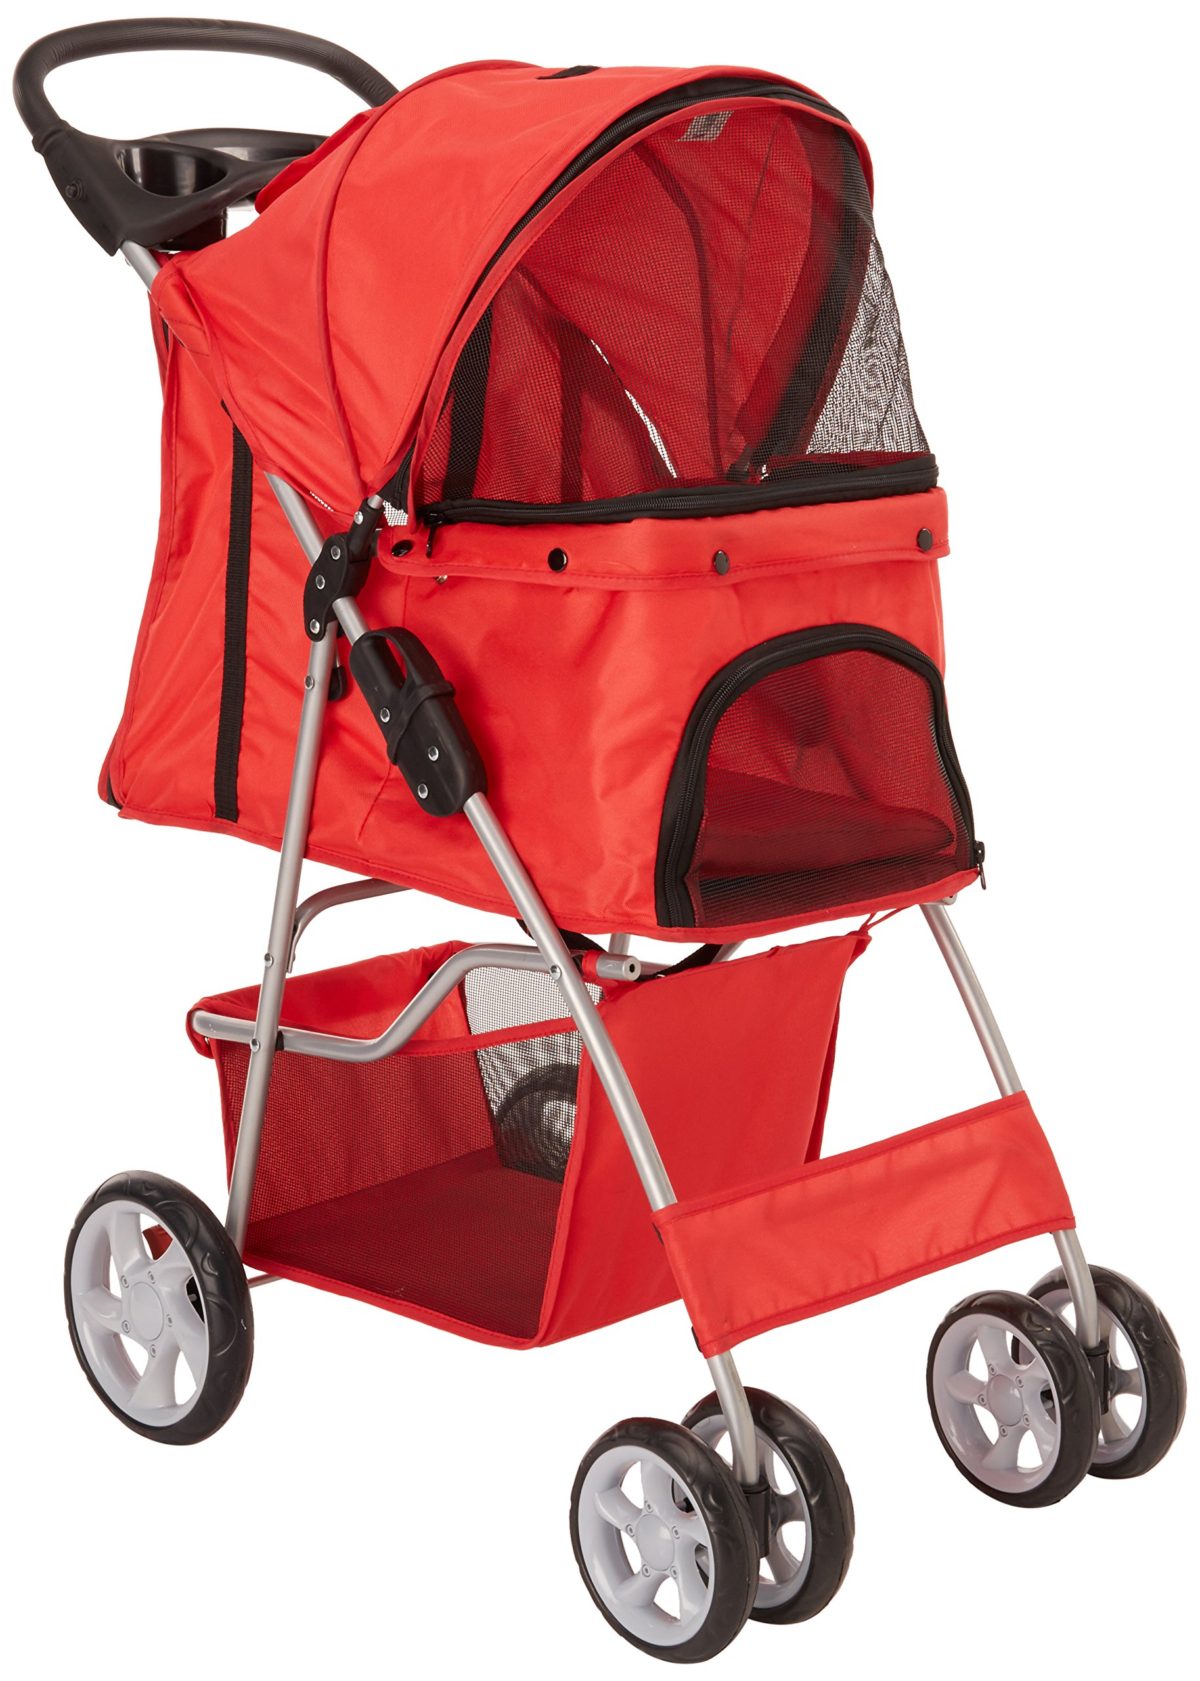 4 Wheeler Pet Stroller for Dogs and Cats